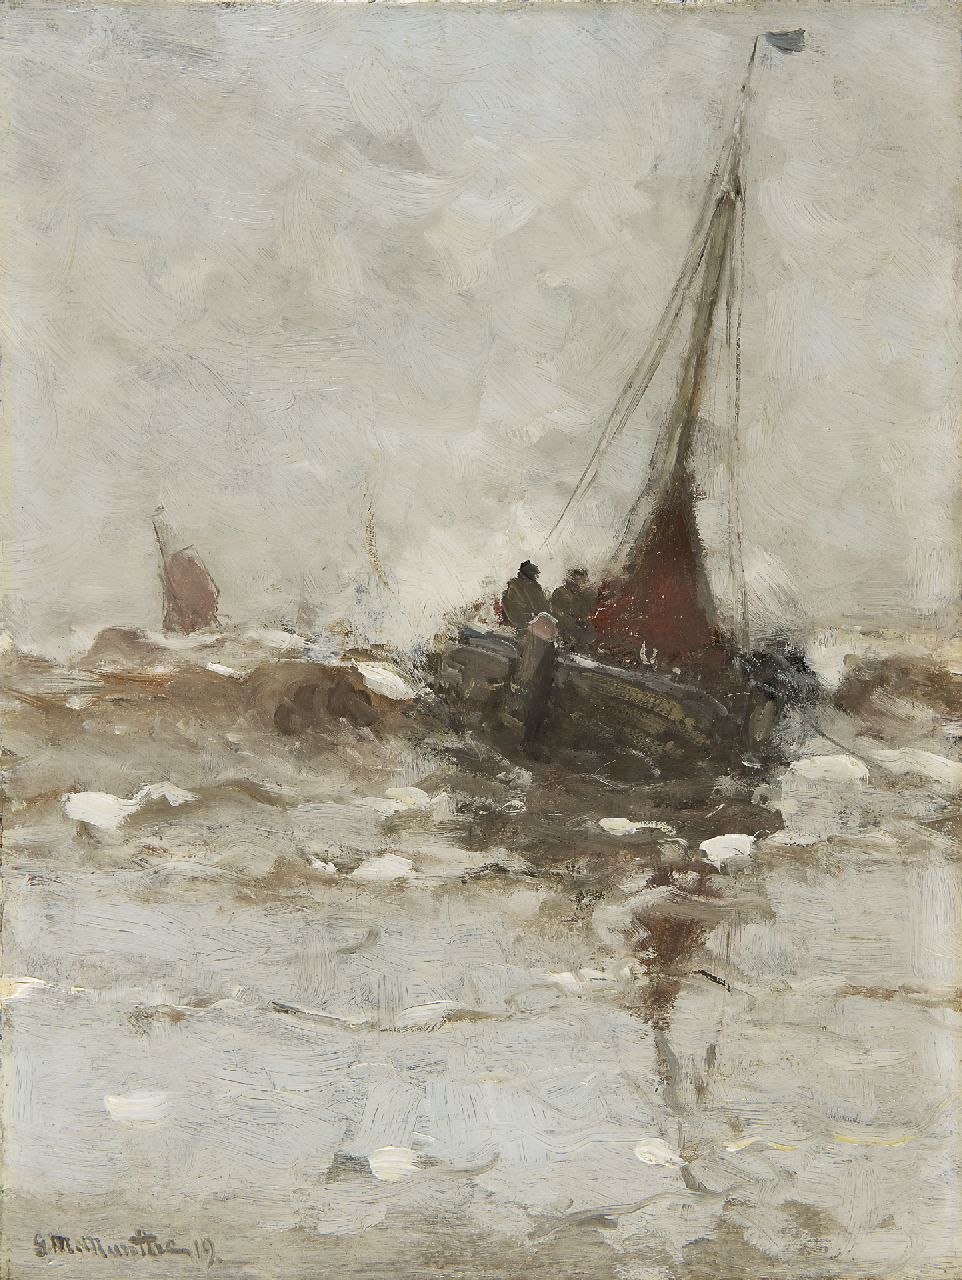 Munthe G.A.L.  | Gerhard Arij Ludwig 'Morgenstjerne' Munthe, A fishing boat in the surf, oil on canvas 40.3 x 30.2 cm, signed l.l. and dated '19